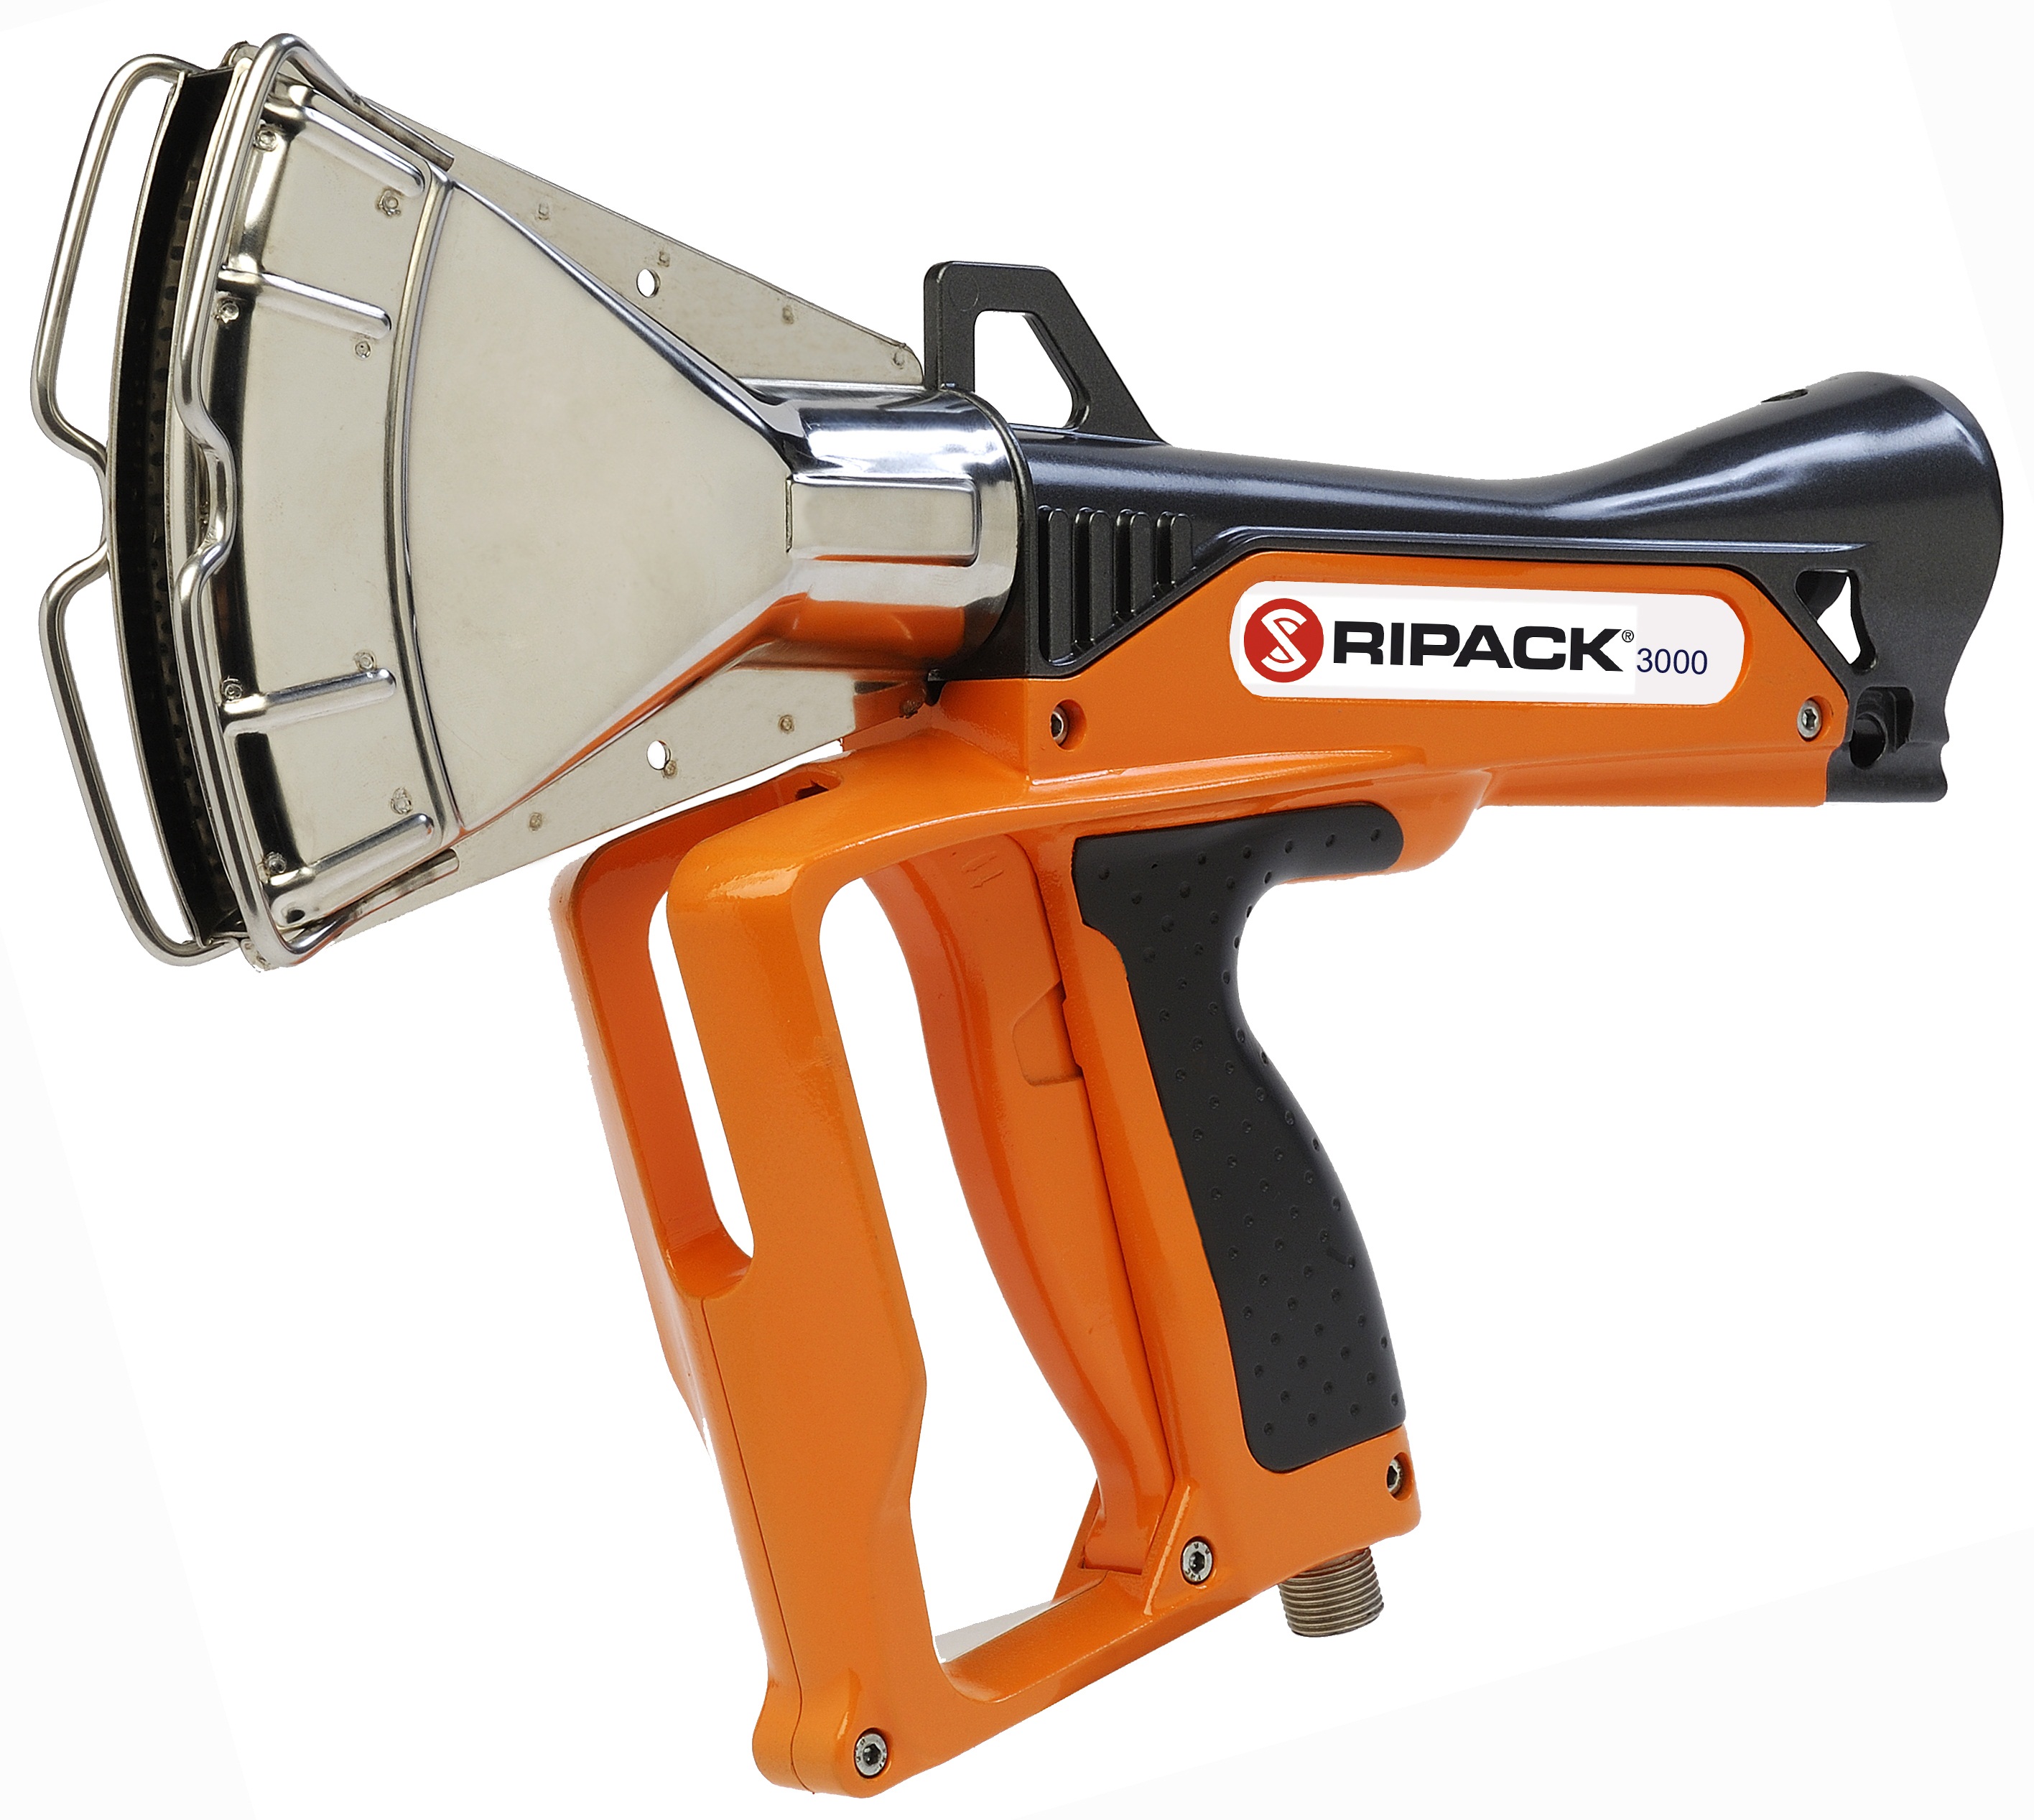 The Ripack 3000 heat shrink gun combines patented cold-nozzle technology with 76kW btu’s of power.